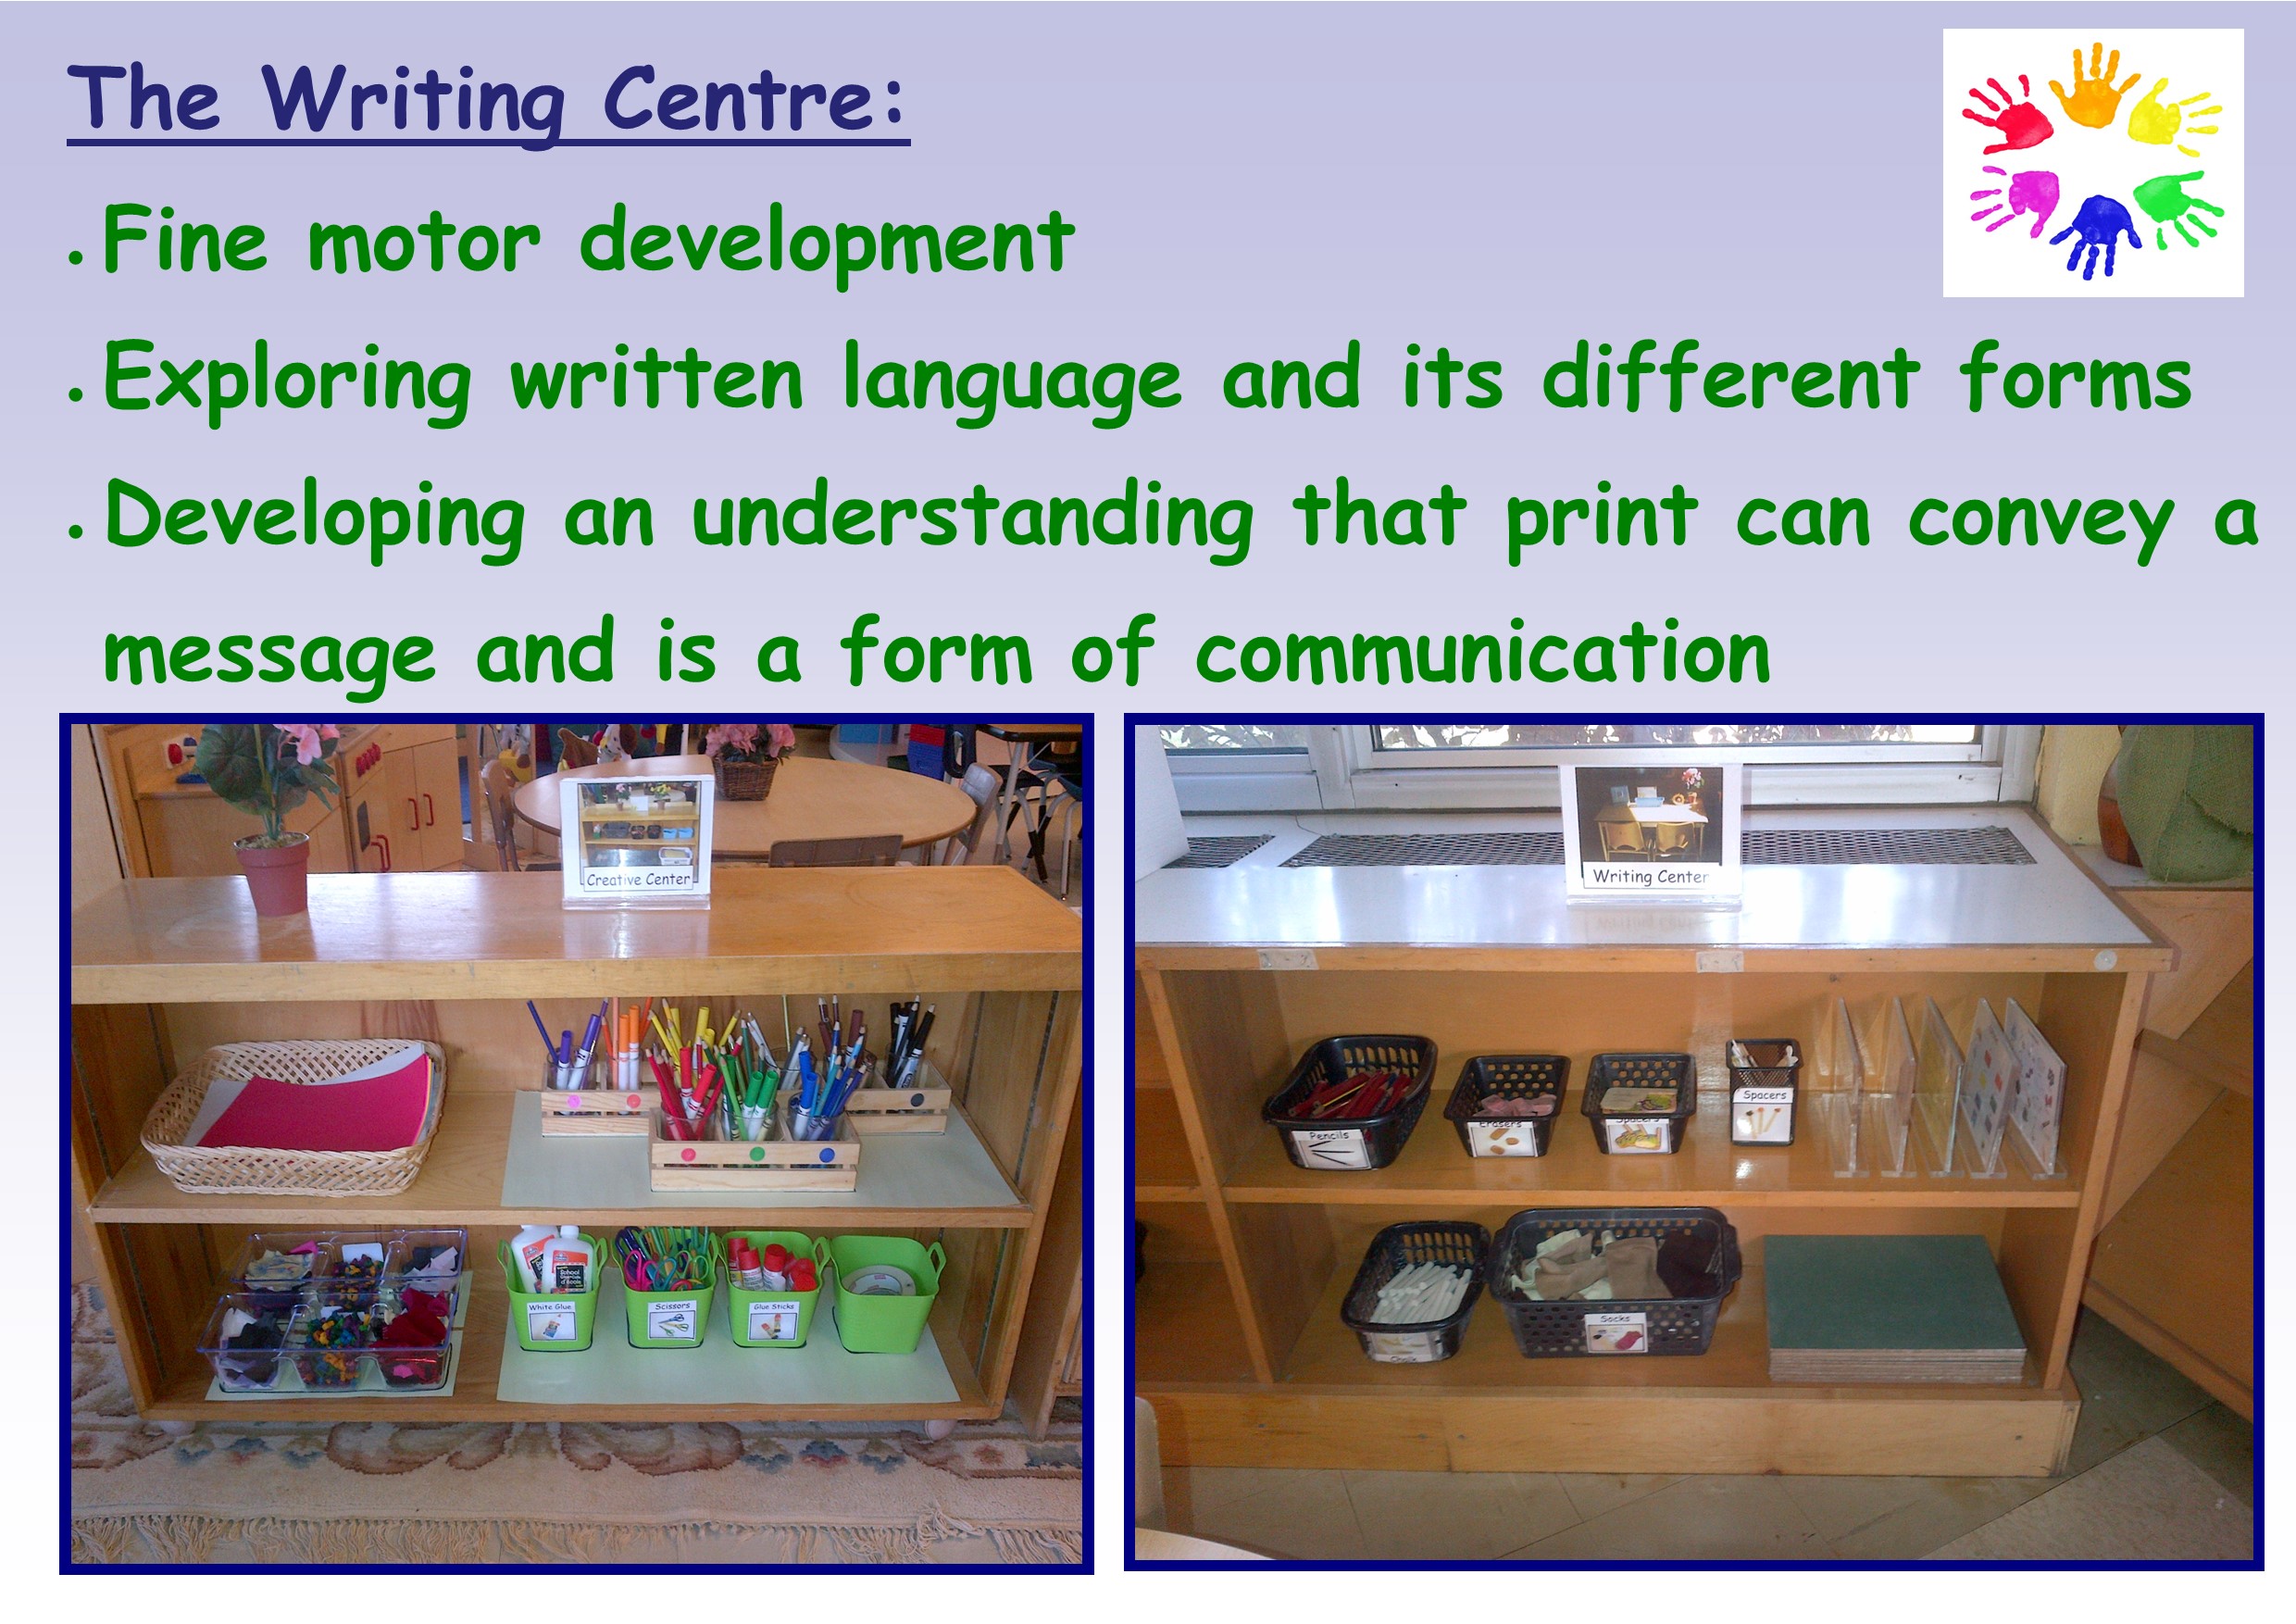 The Writing Centre